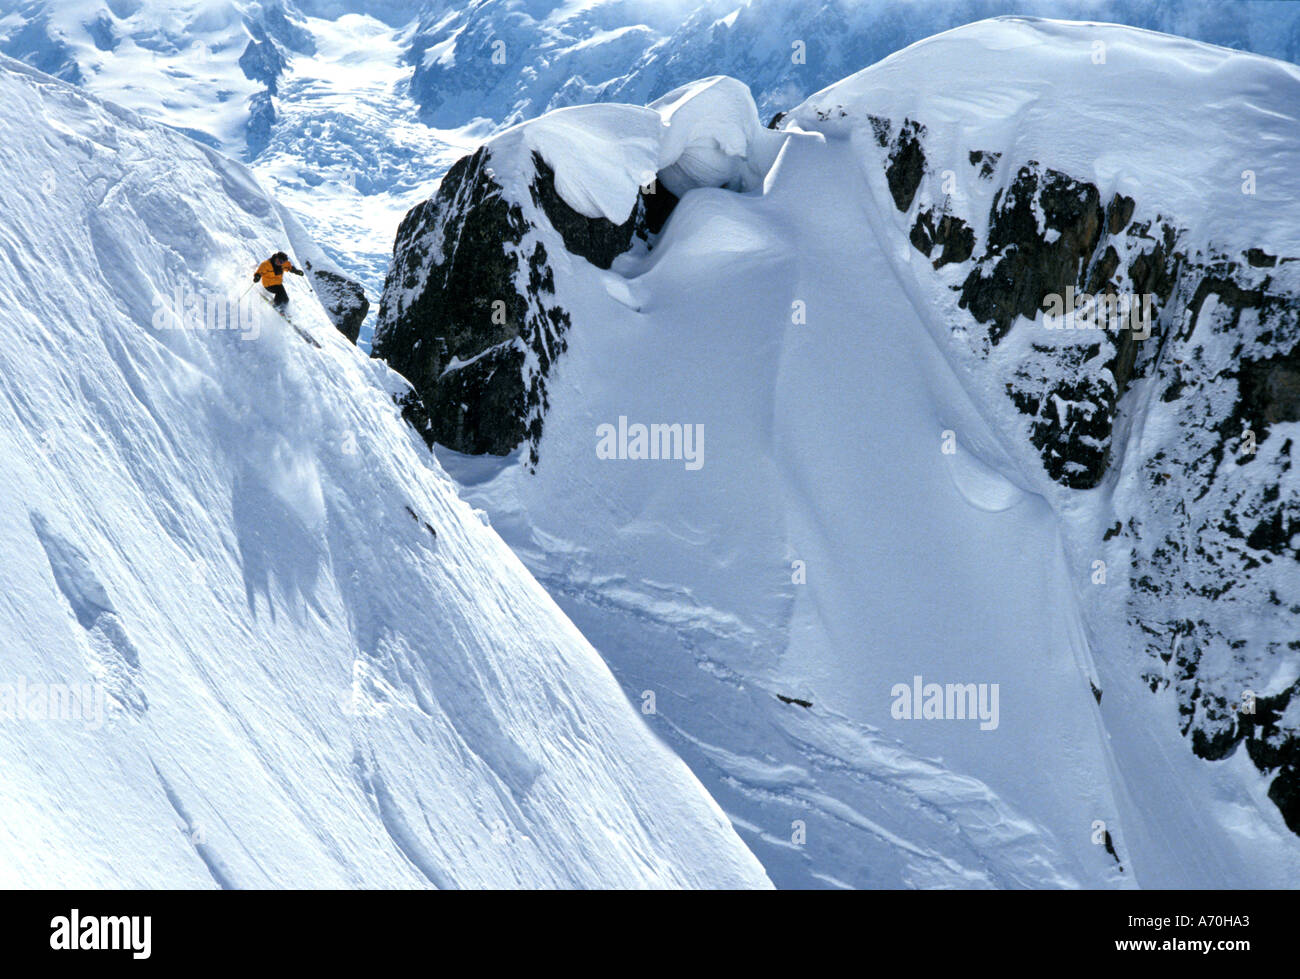 Lone extreme skier off piste high in the peaks in the Chamonix area France Stock Photo